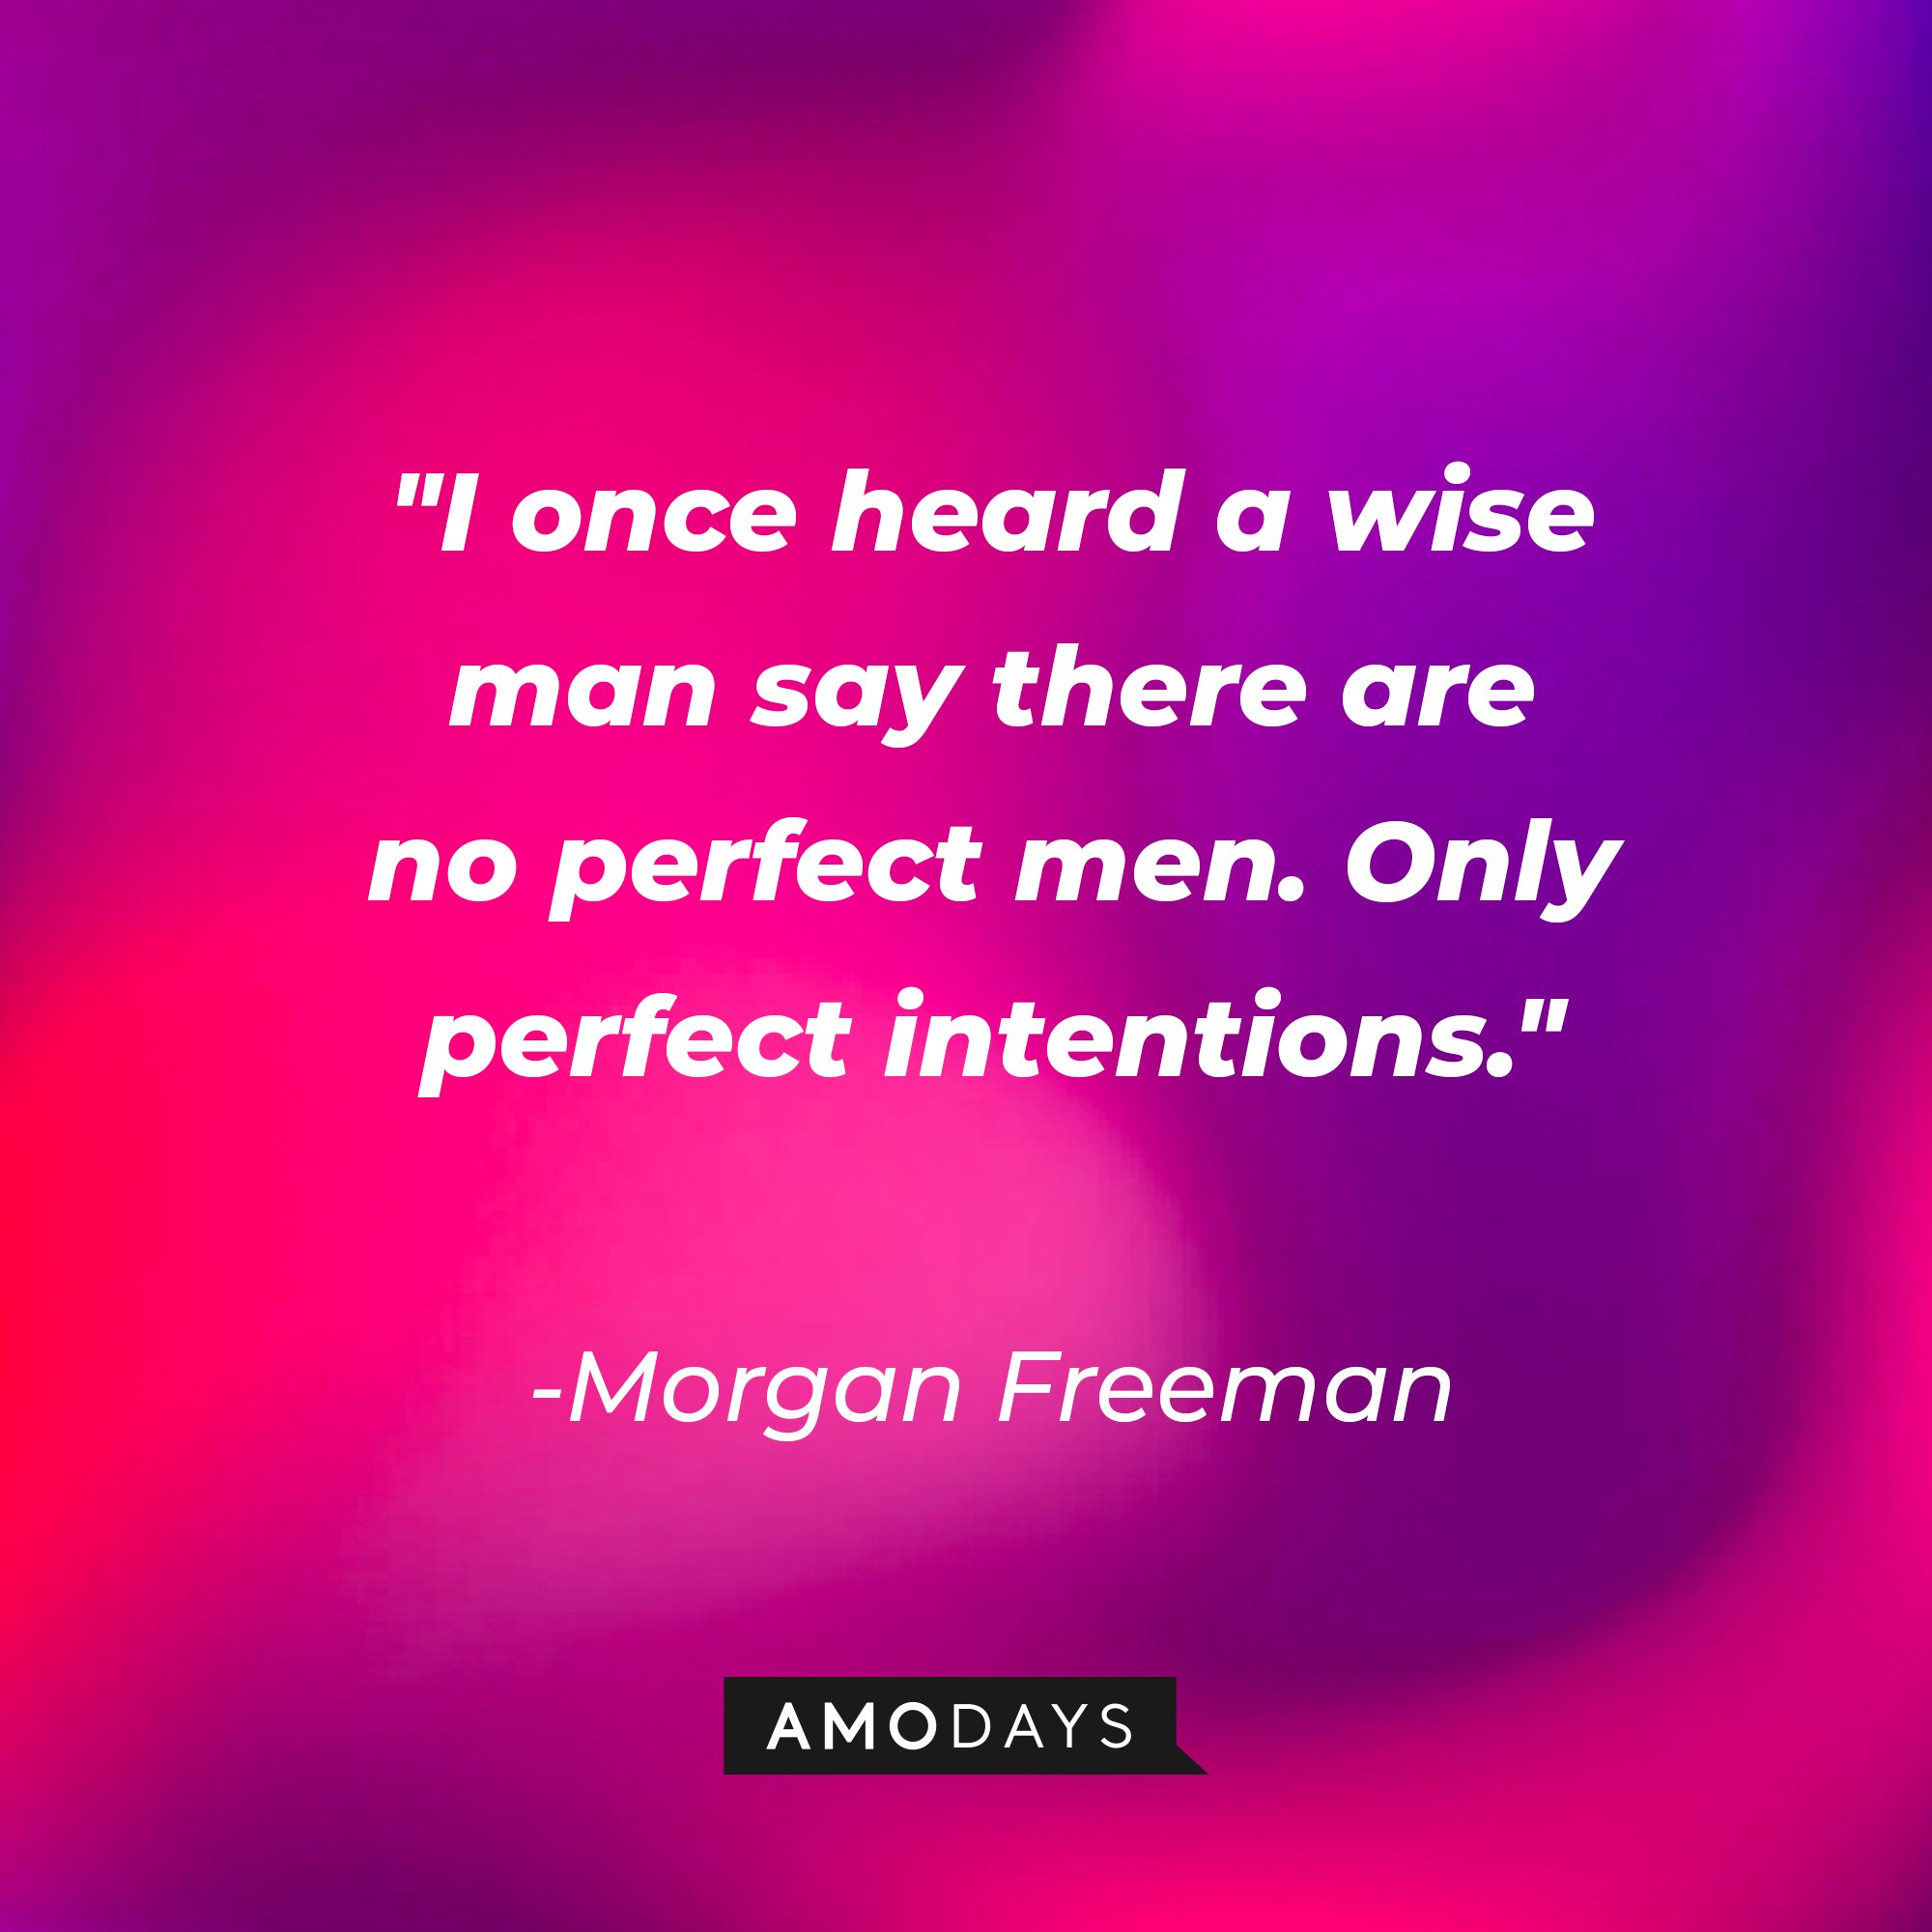  Morgan Freeman’s quote: "I once heard a wise man say there are no perfect men. Only perfect intentions." | Image: AmoDays 